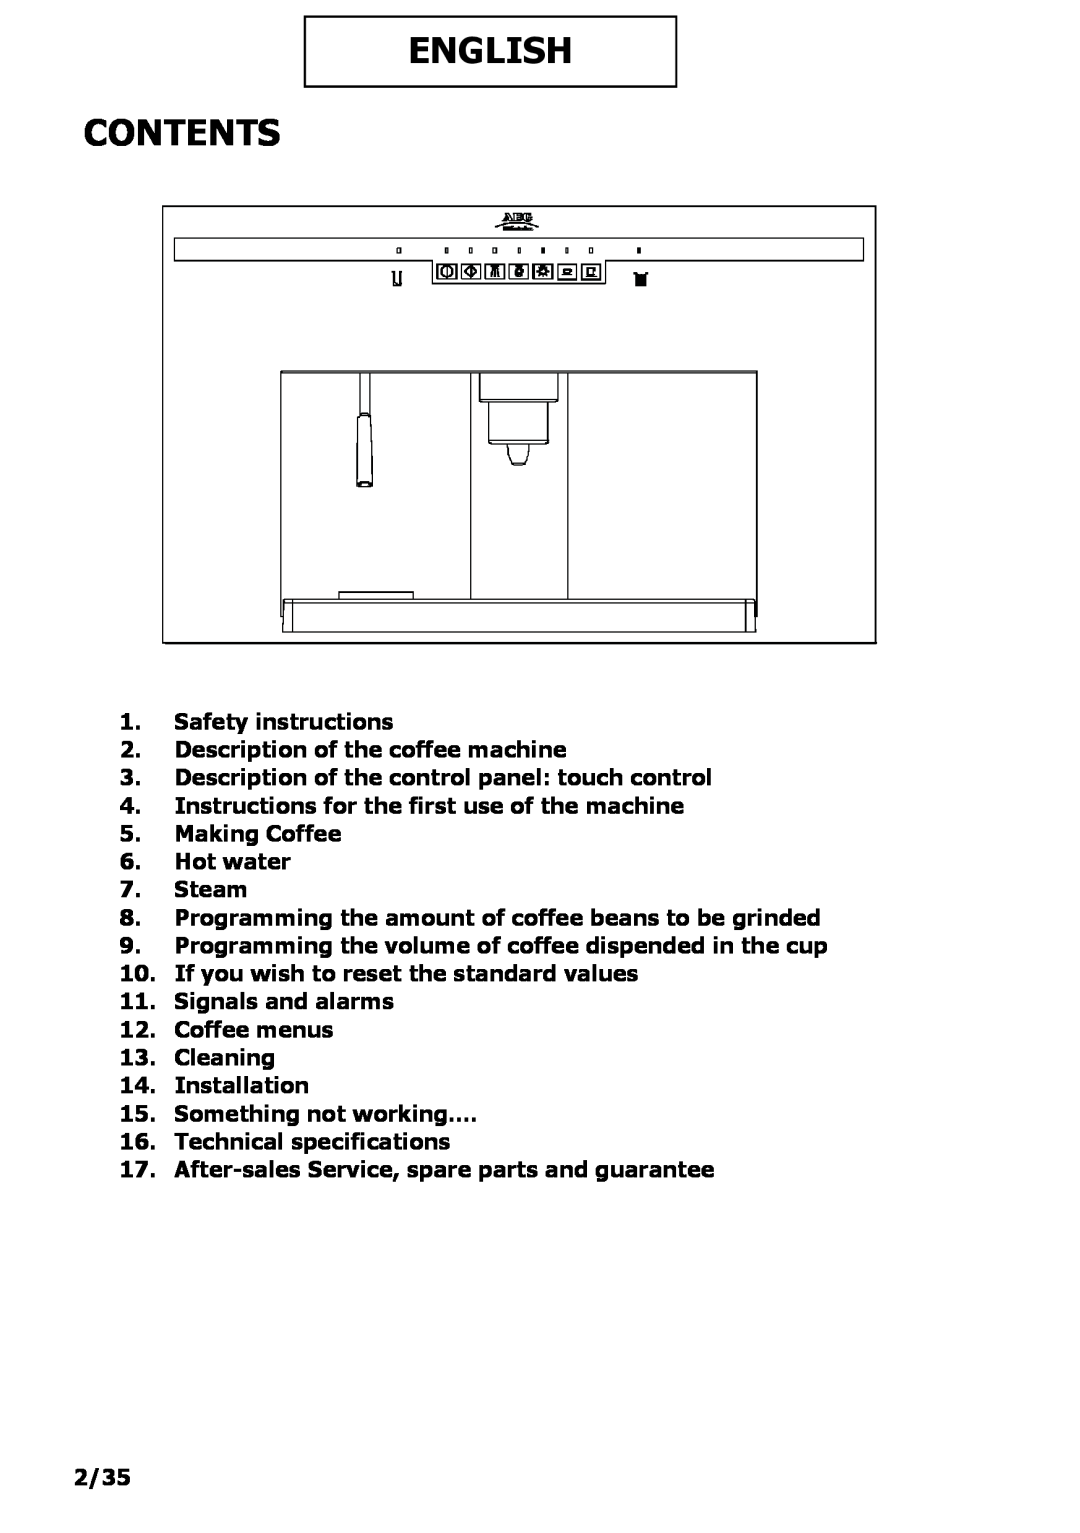 Electrolux PE 9038-m fww installation instructions English Contents 